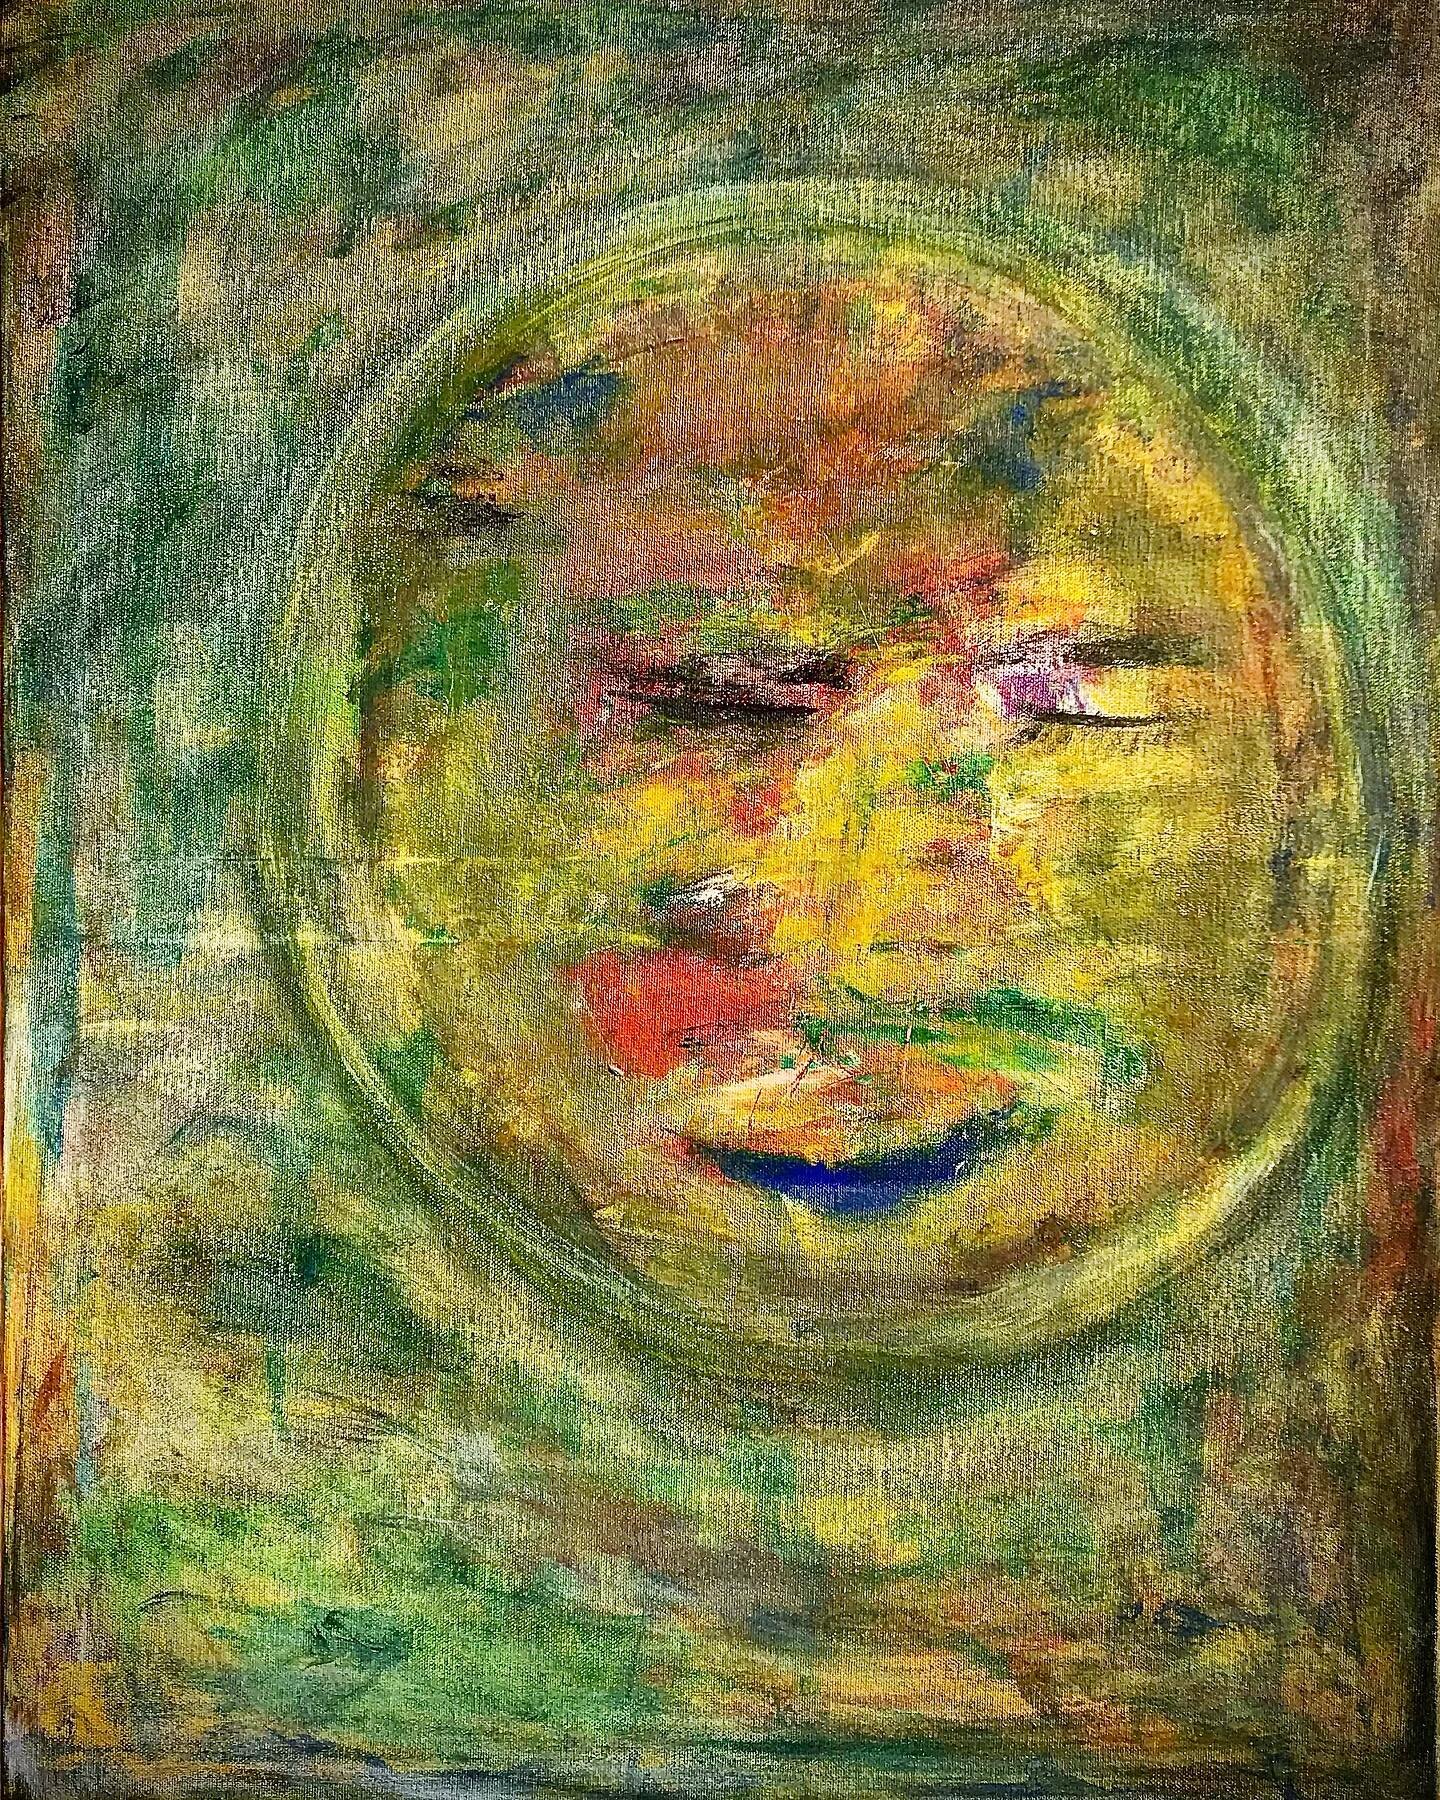 The smile of the moon&ldquo;
Acrylic on canvas
60 x 80 cm
.
Whenever there's a full moon, I think he's watching us. He winks at us with his distant eye. After many layers of paint, this moon face suddenly winked at me.
.
#art#artwork#moon#moonnight#m